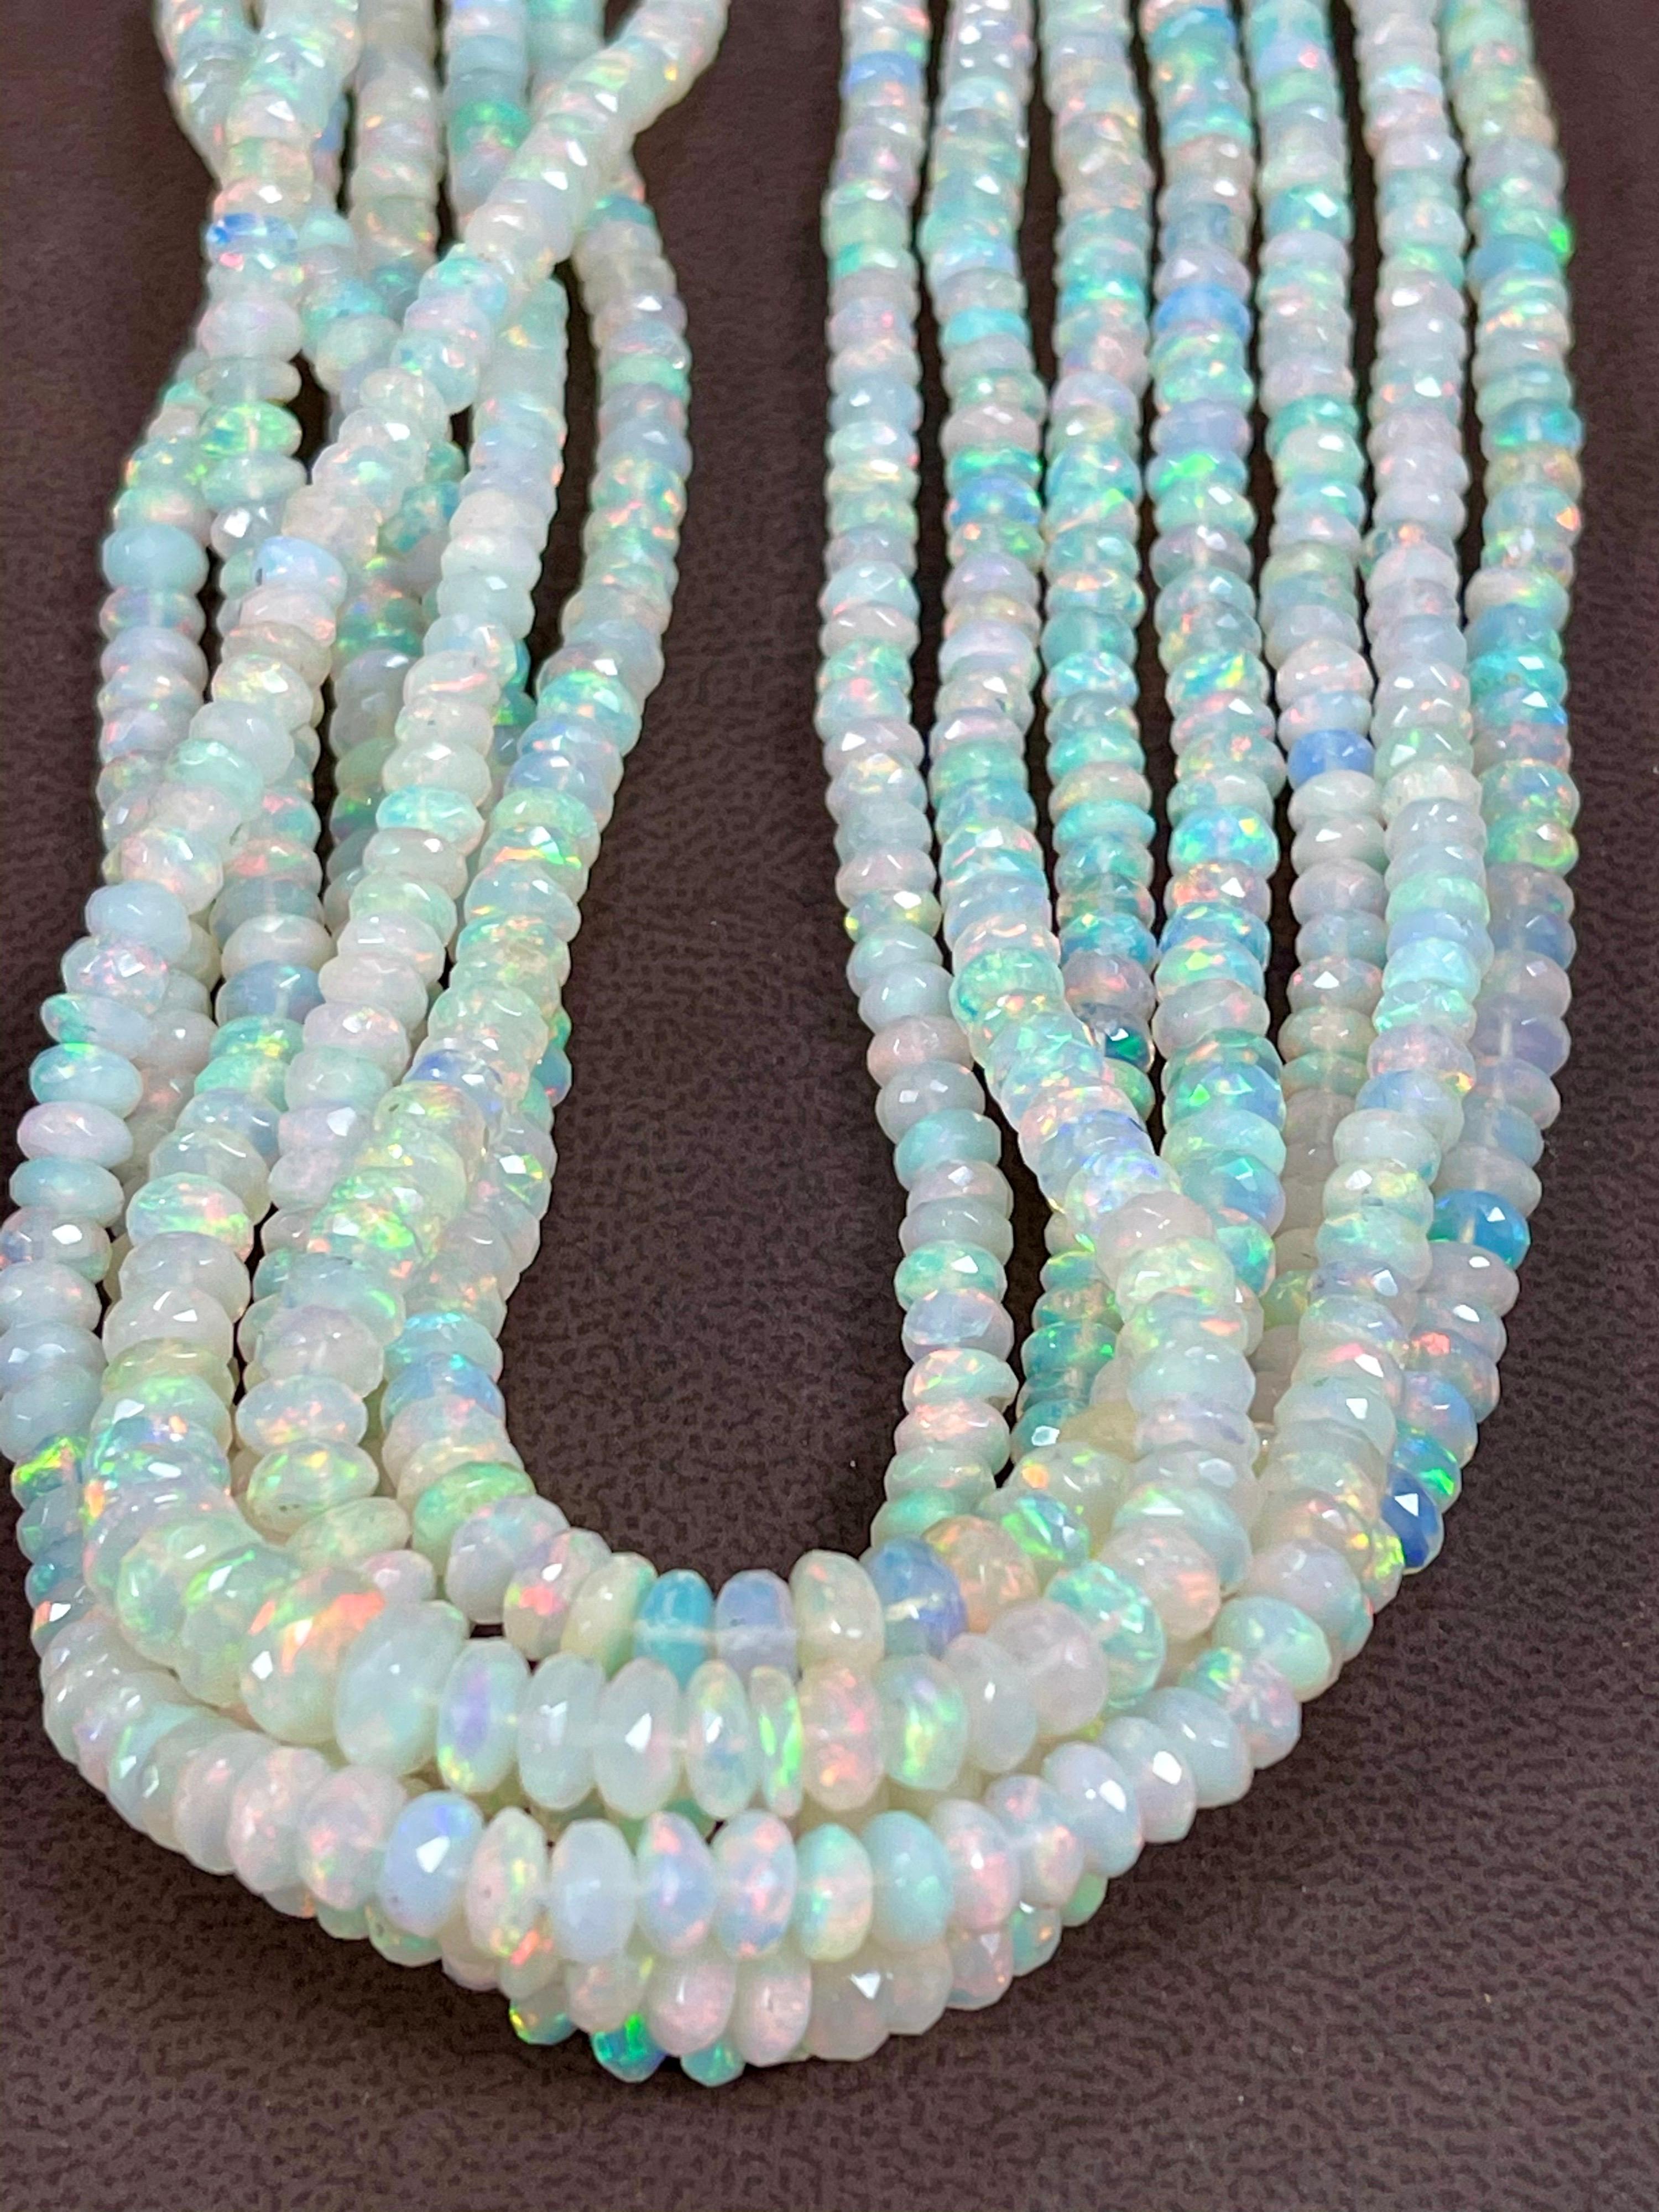 Natural Opal Faceted Bead Single Strand Necklace on Sale 14 K Gold Lobster Clasp In Excellent Condition For Sale In New York, NY